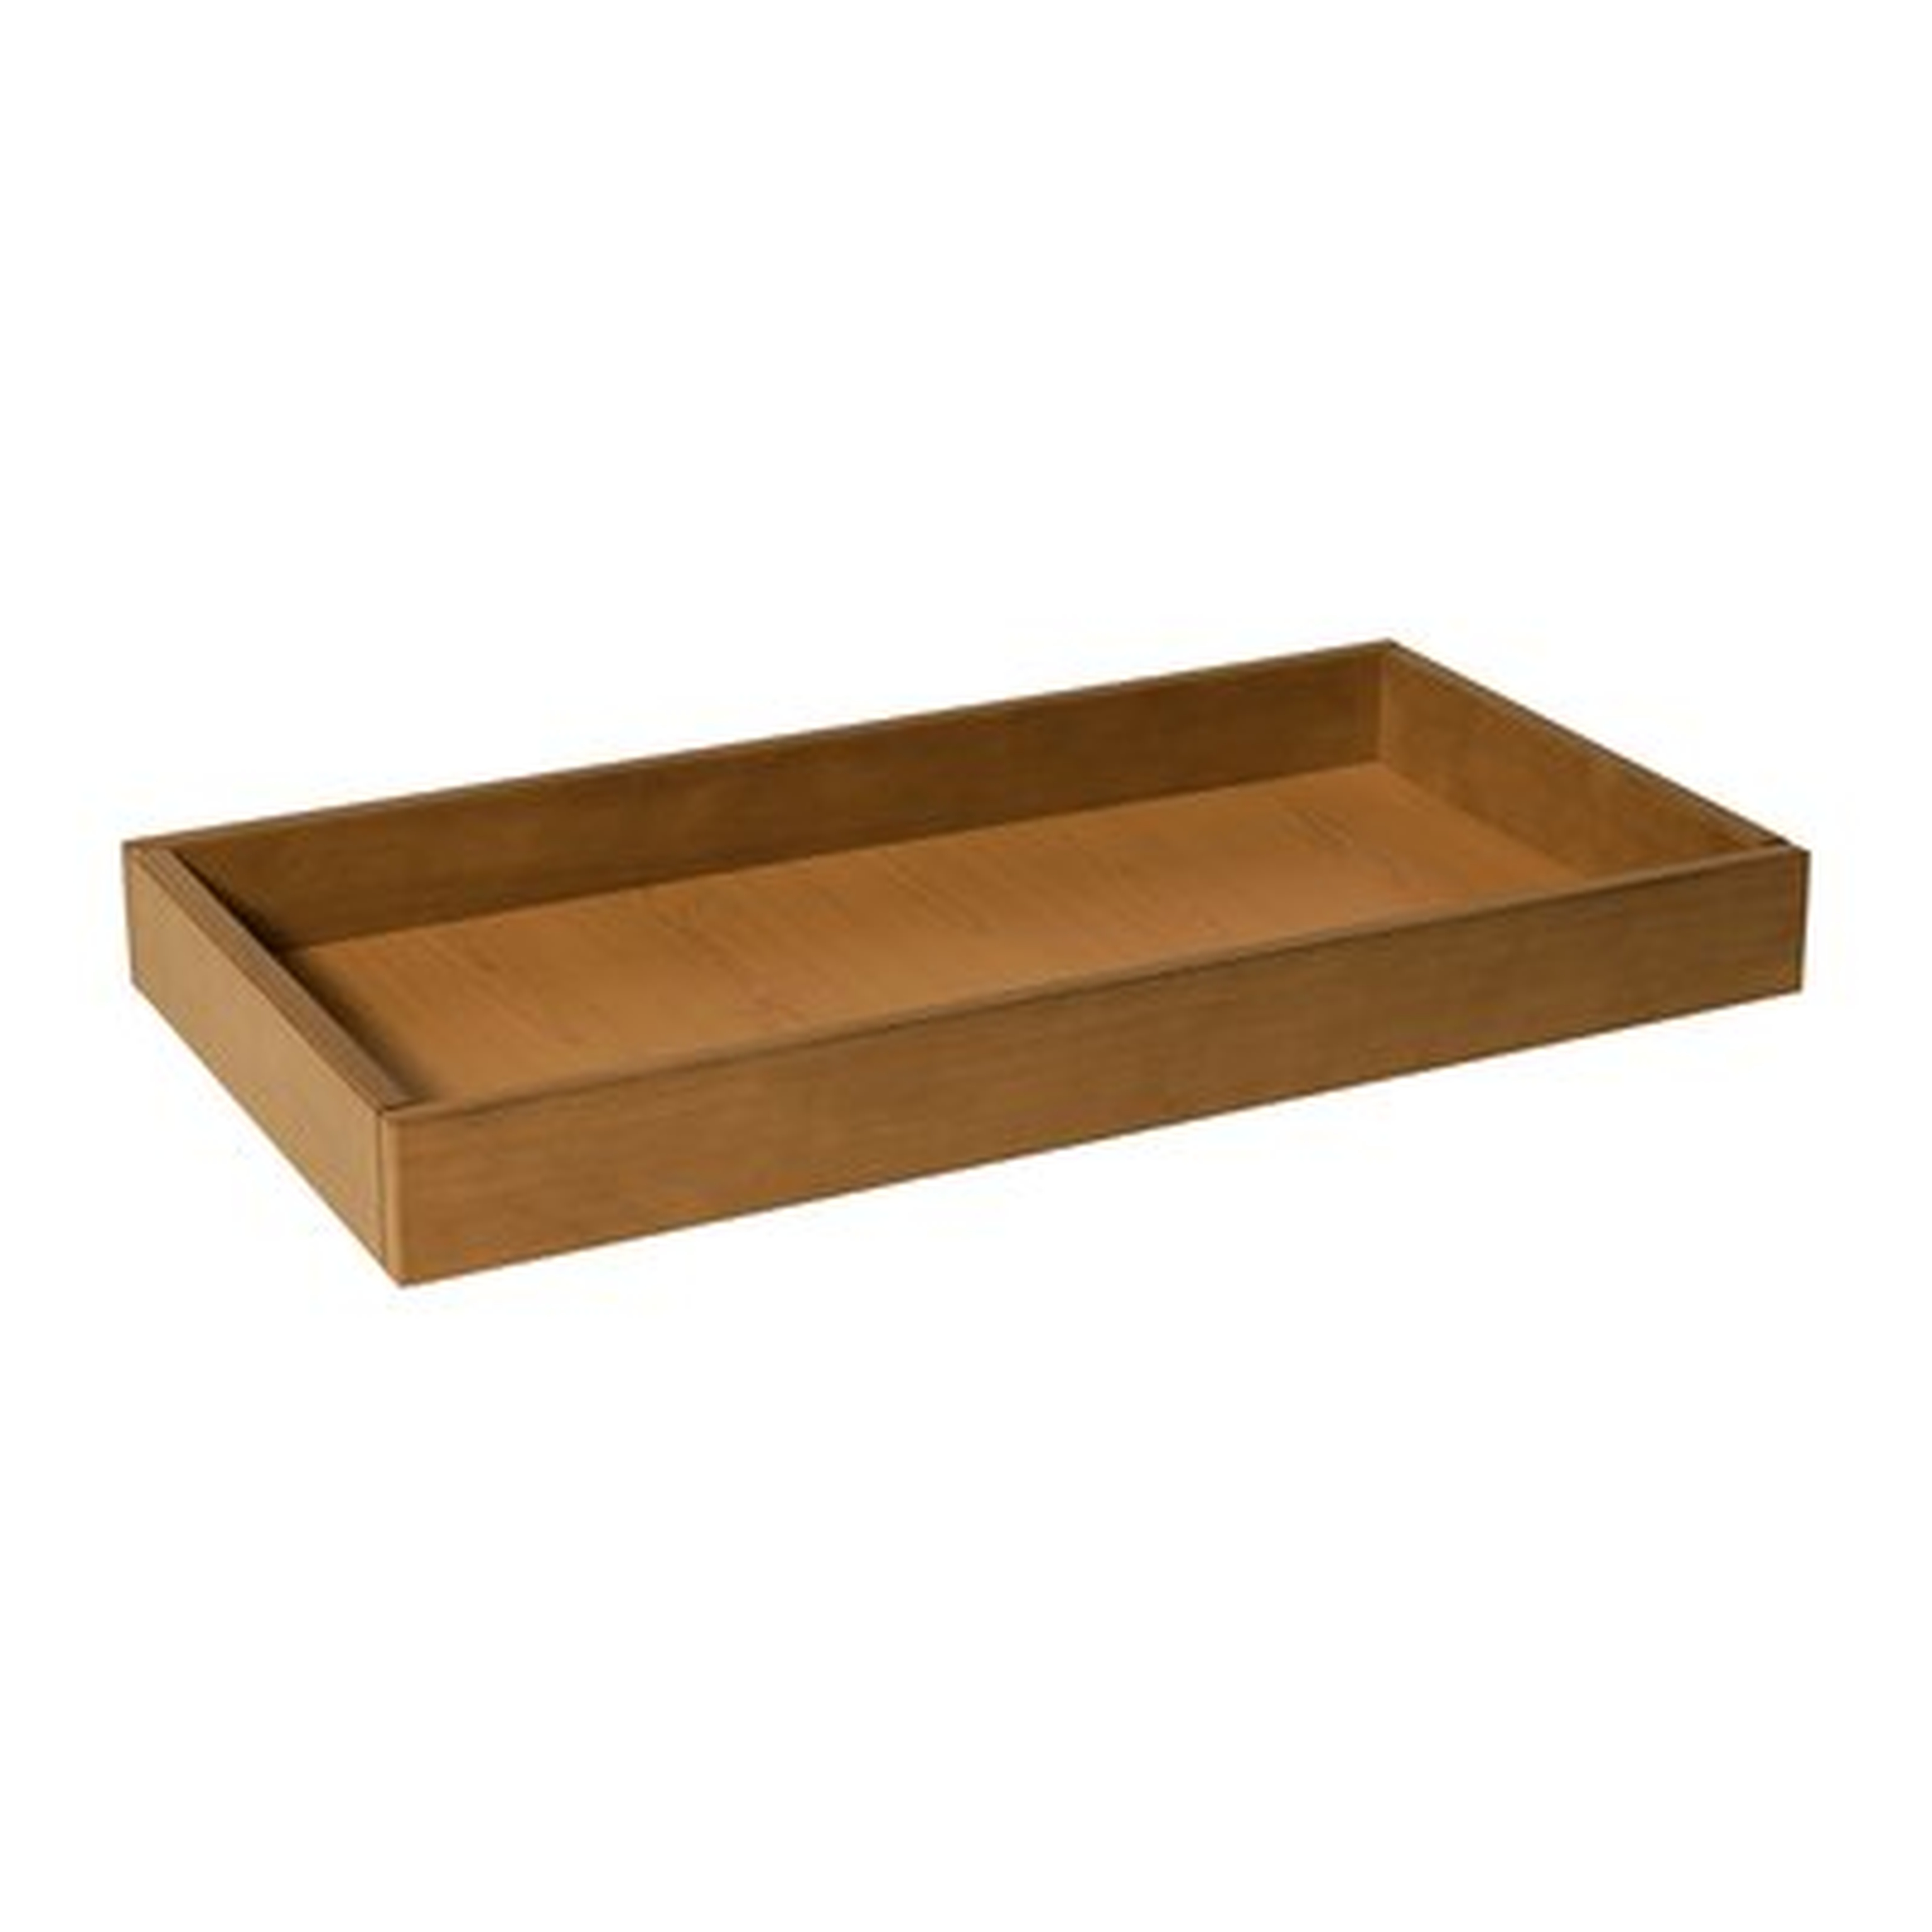 Universal Removable Changing Tray - Wayfair